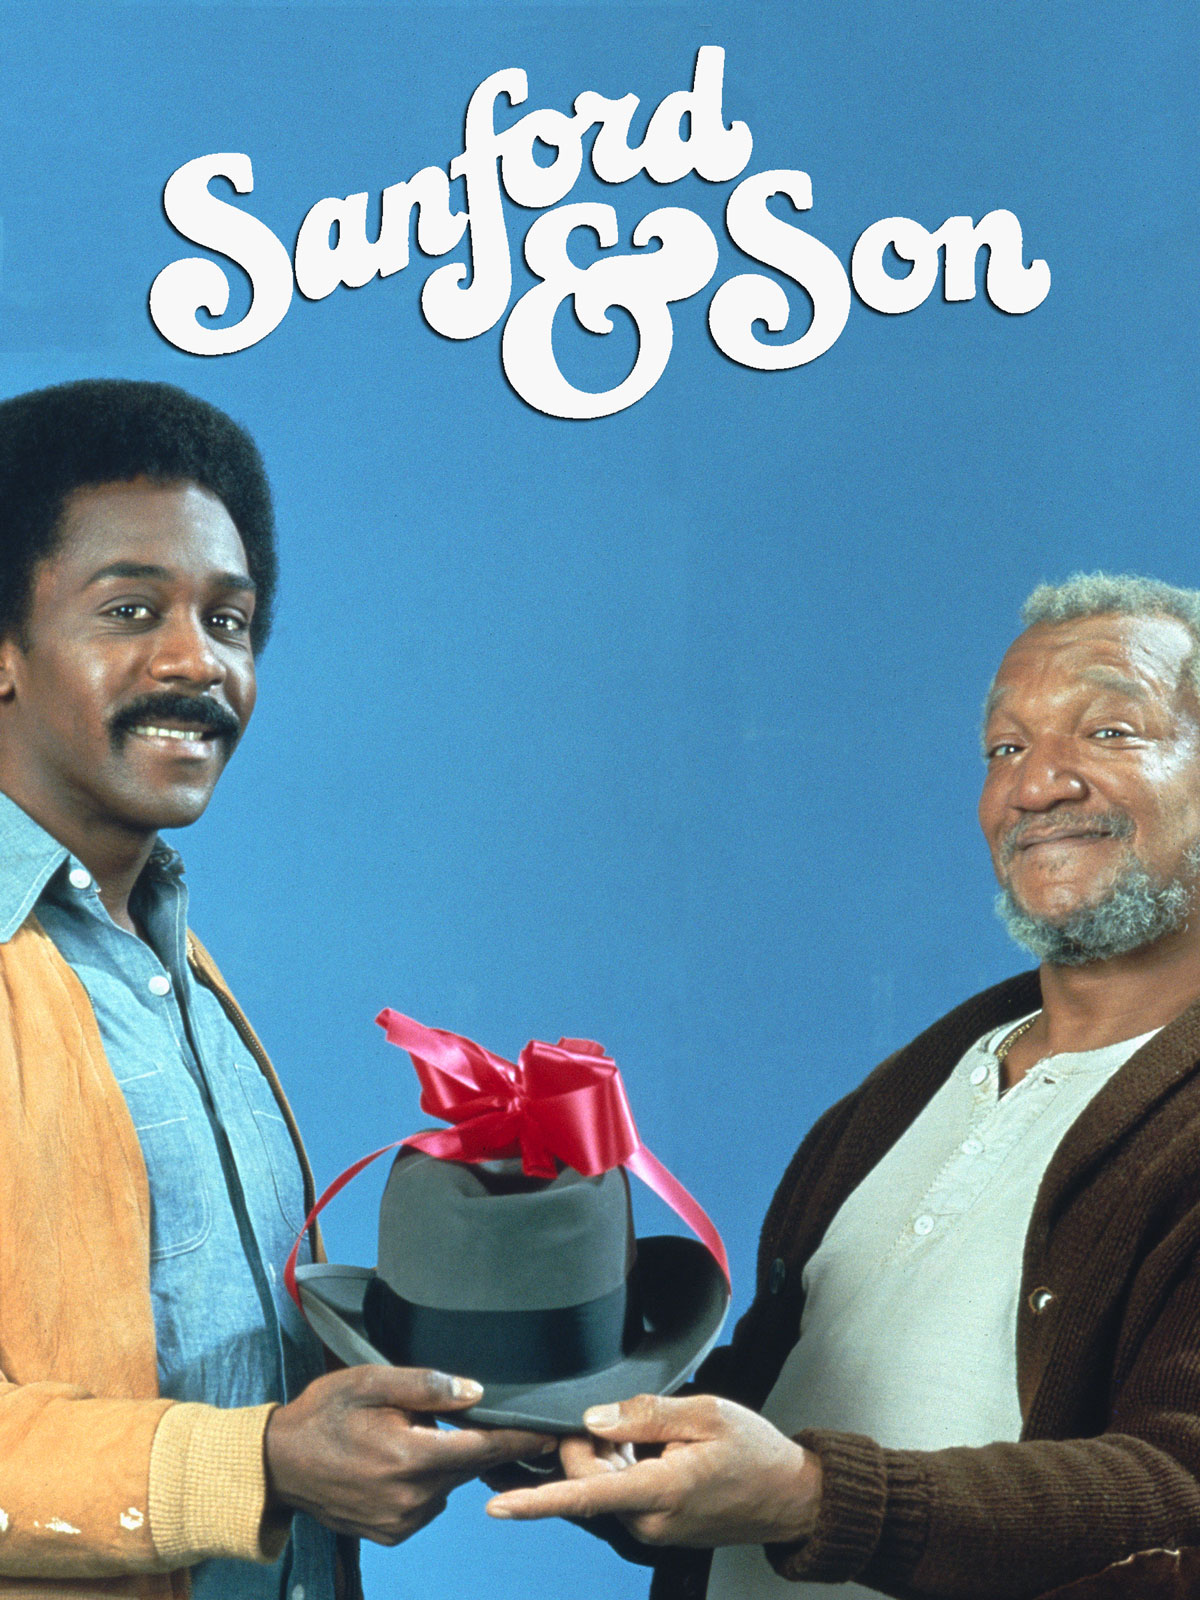 free sanford and son